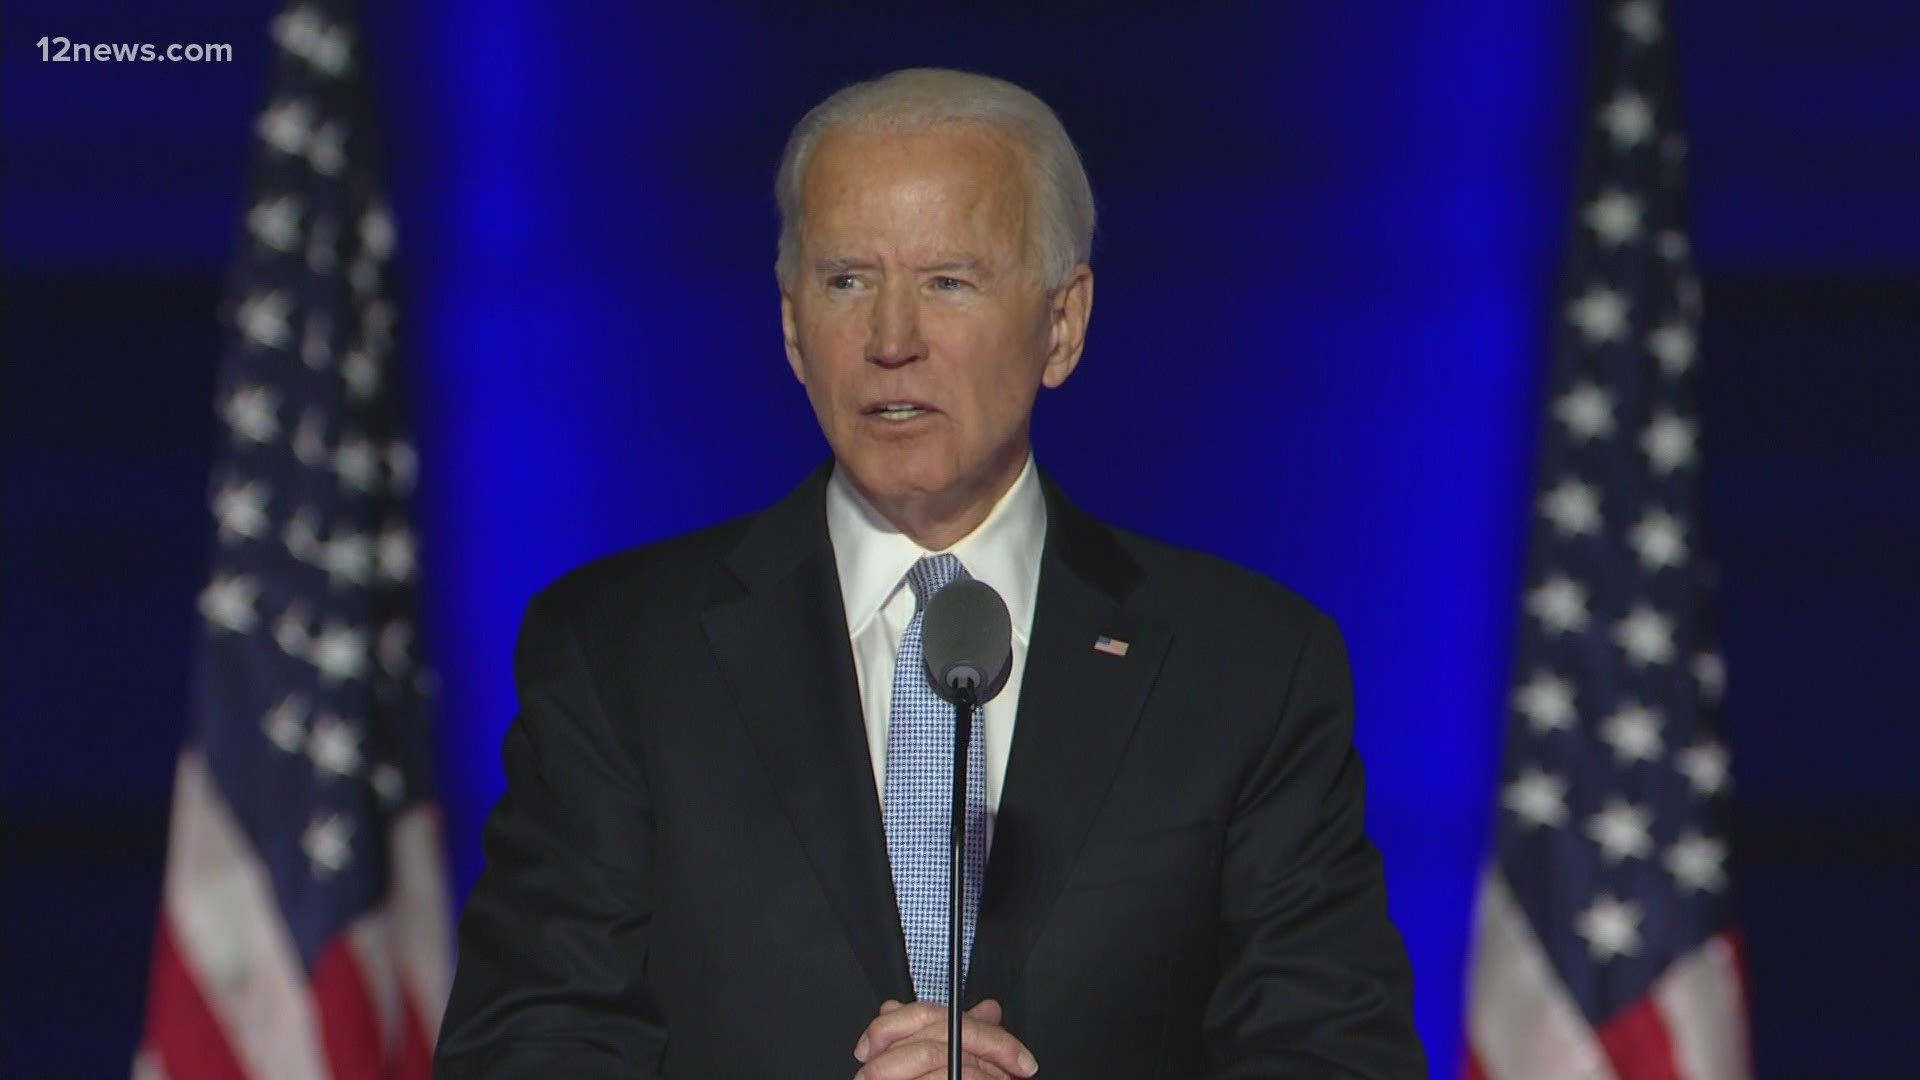 The Arizona Supreme Court has upheld Arizona's election results for President-elect Joe Biden. The court unanimously confirmed the election of the Biden electors.